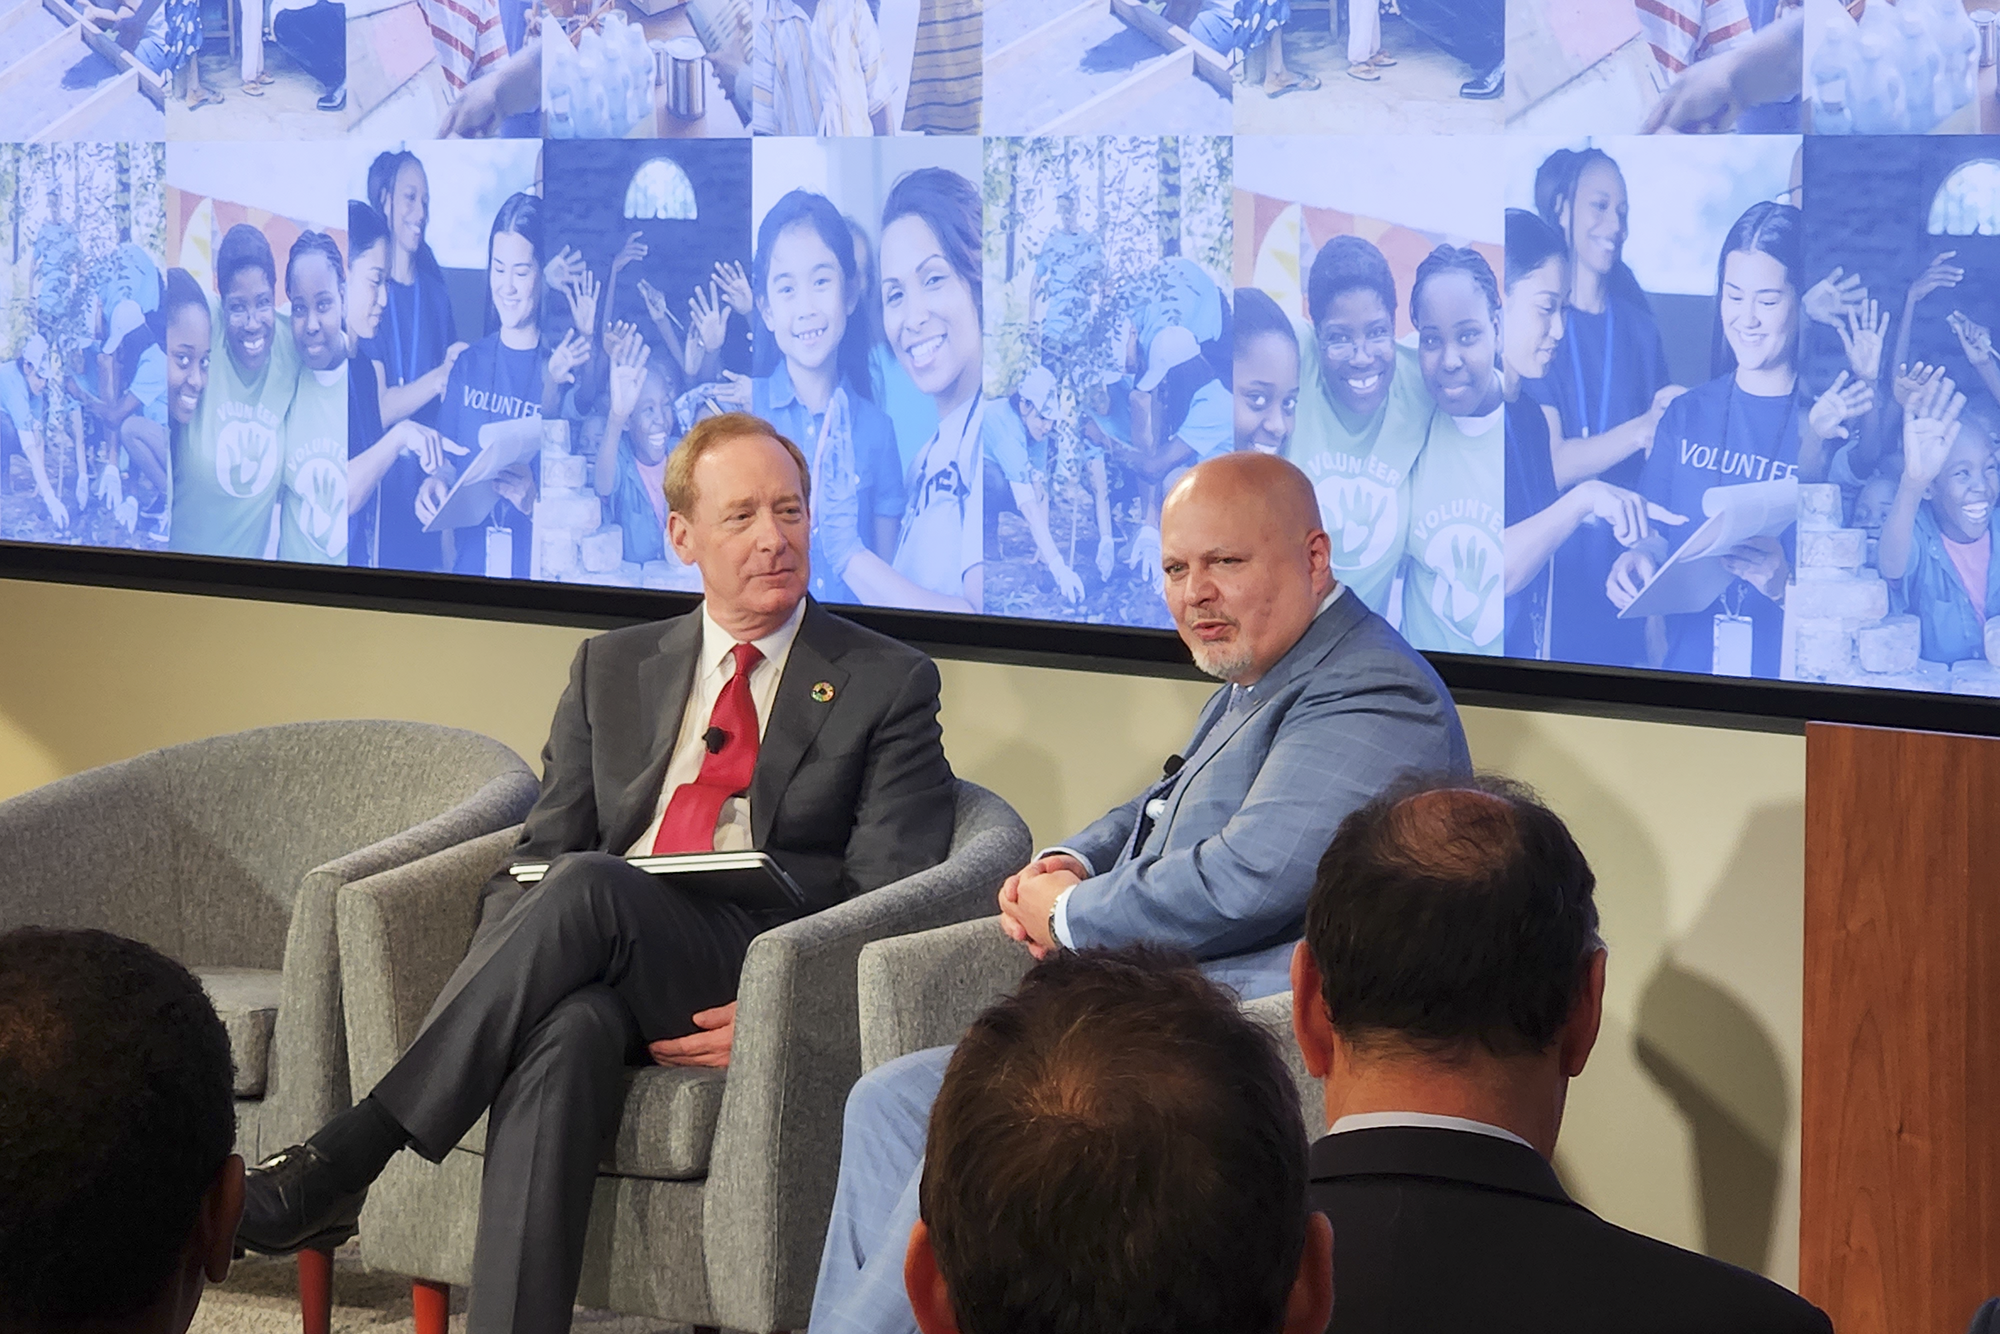 International Criminal Court's prosecutor Karim Khan (right) in discussion with Brad Smith (left), Vice Chair and President of Microsoft